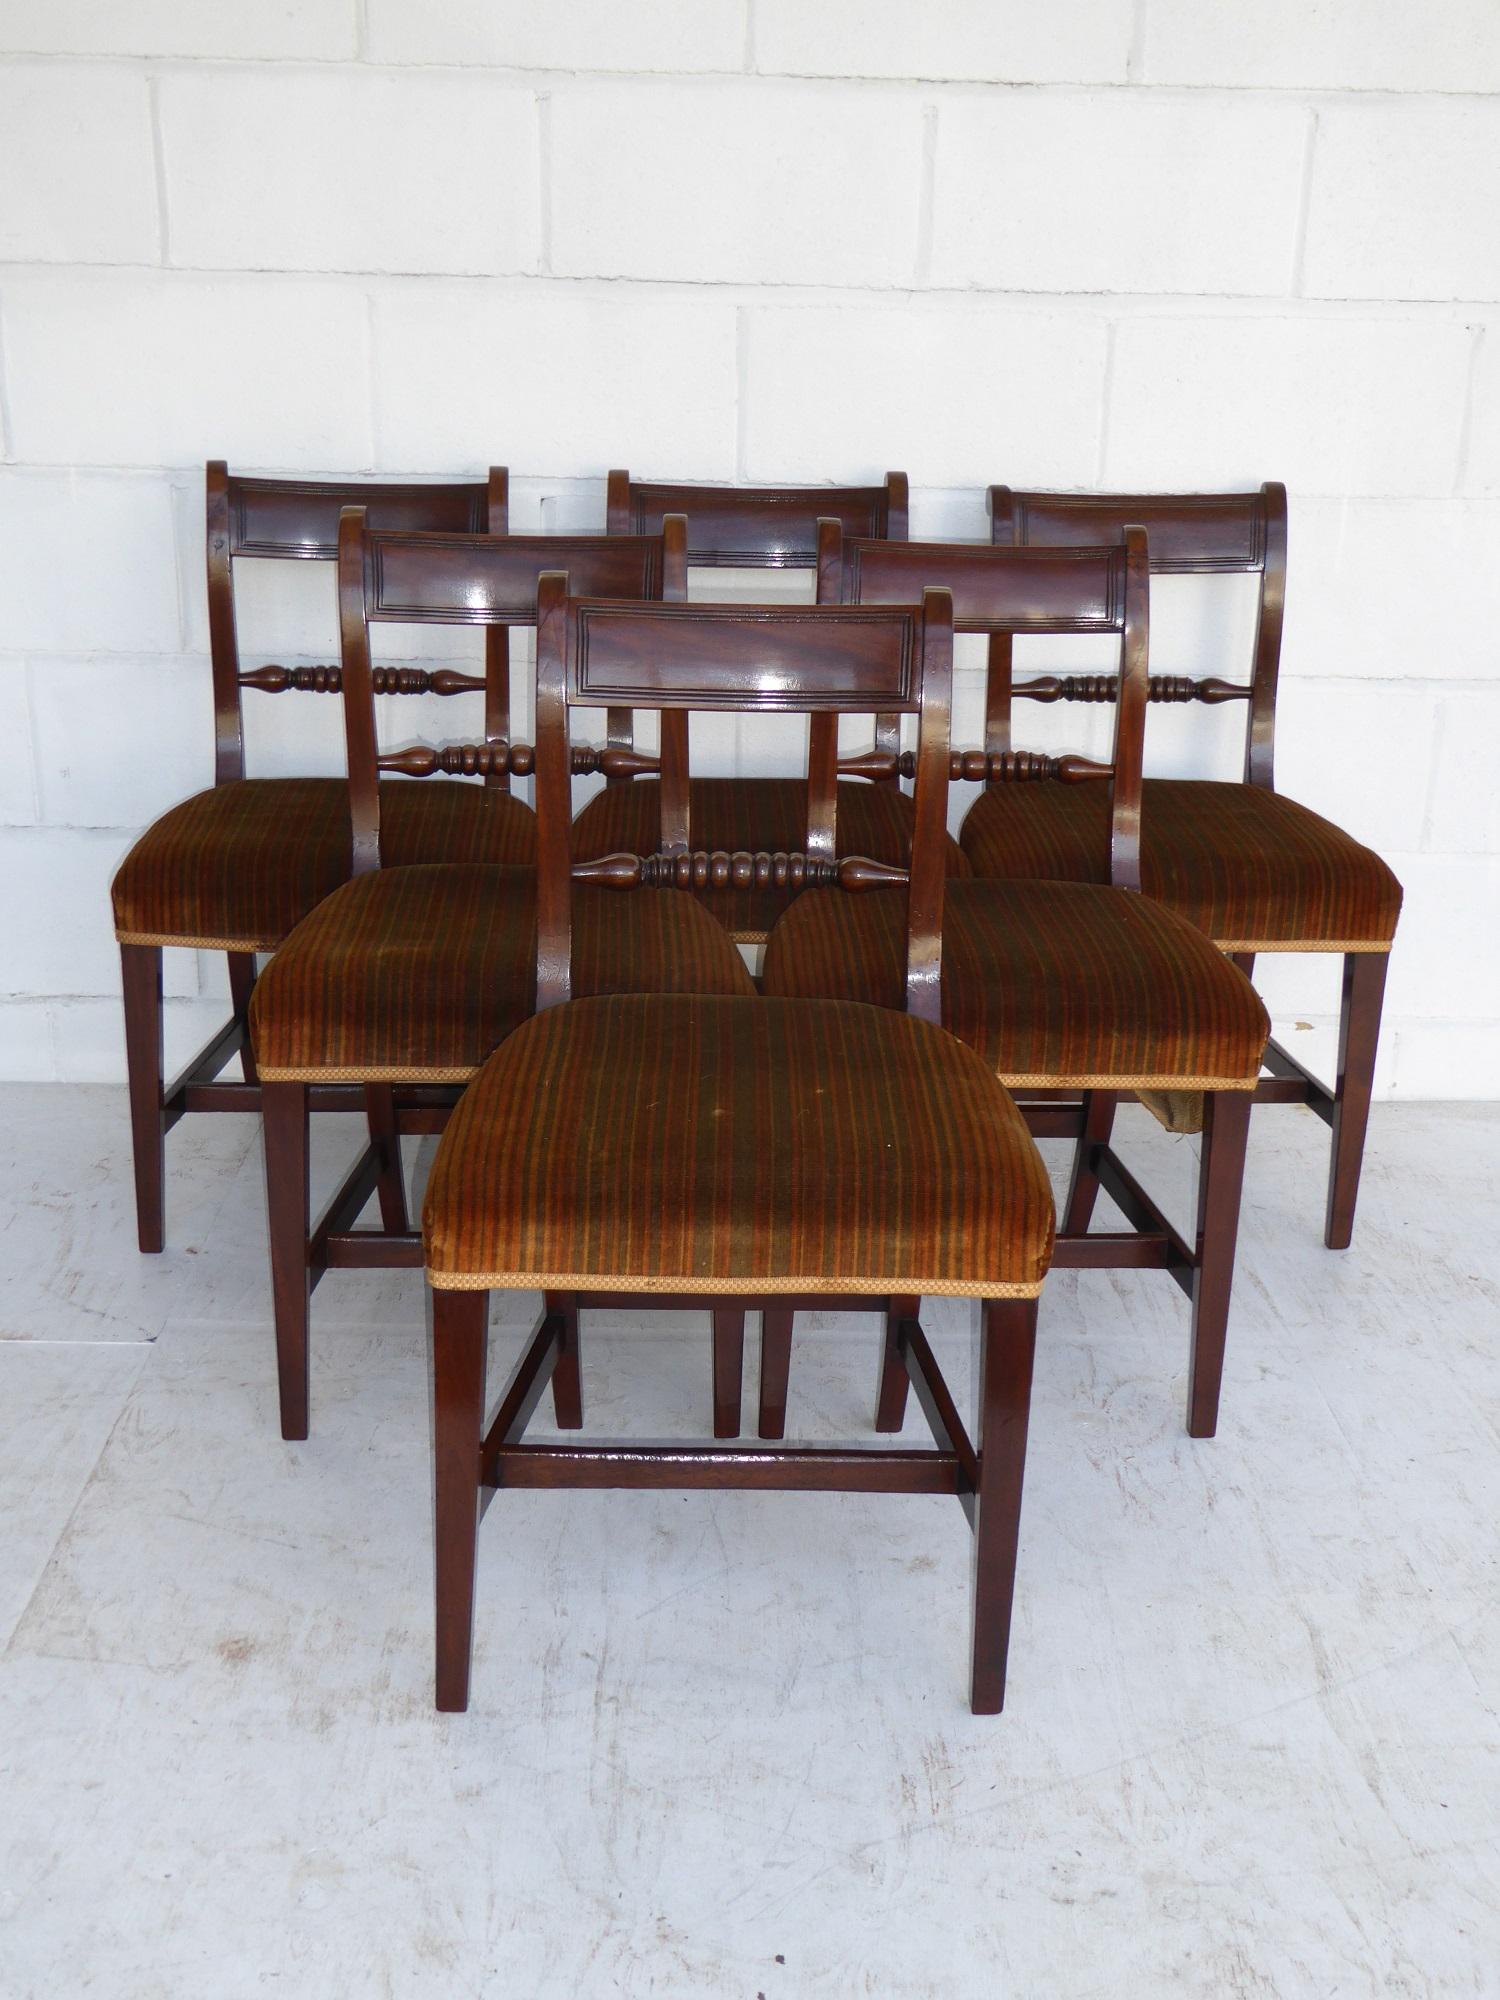 For sale is a set of eight George III mahogany dining chairs. All in good condition having been re-polished by hand.

Carver width 23